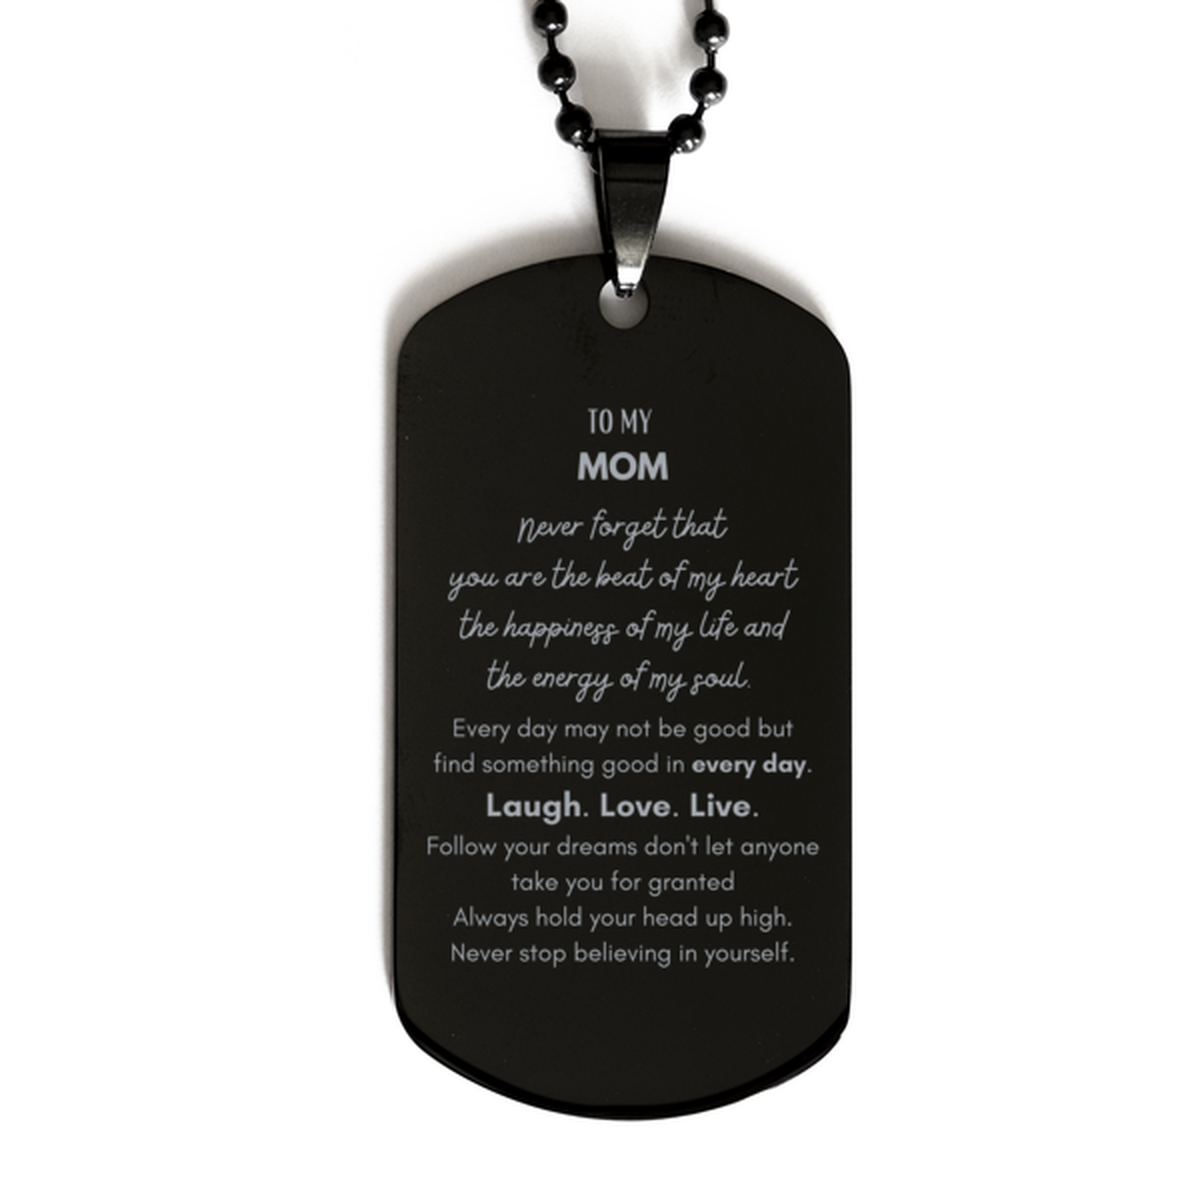 To My Mom Dogtag Gifts, Christmas Mom Black Dog Tag Present, Birthday Unique Motivational For Mom, To My Mom Never forget that you are the beat of my heart the happiness of my life and the energy of my soul